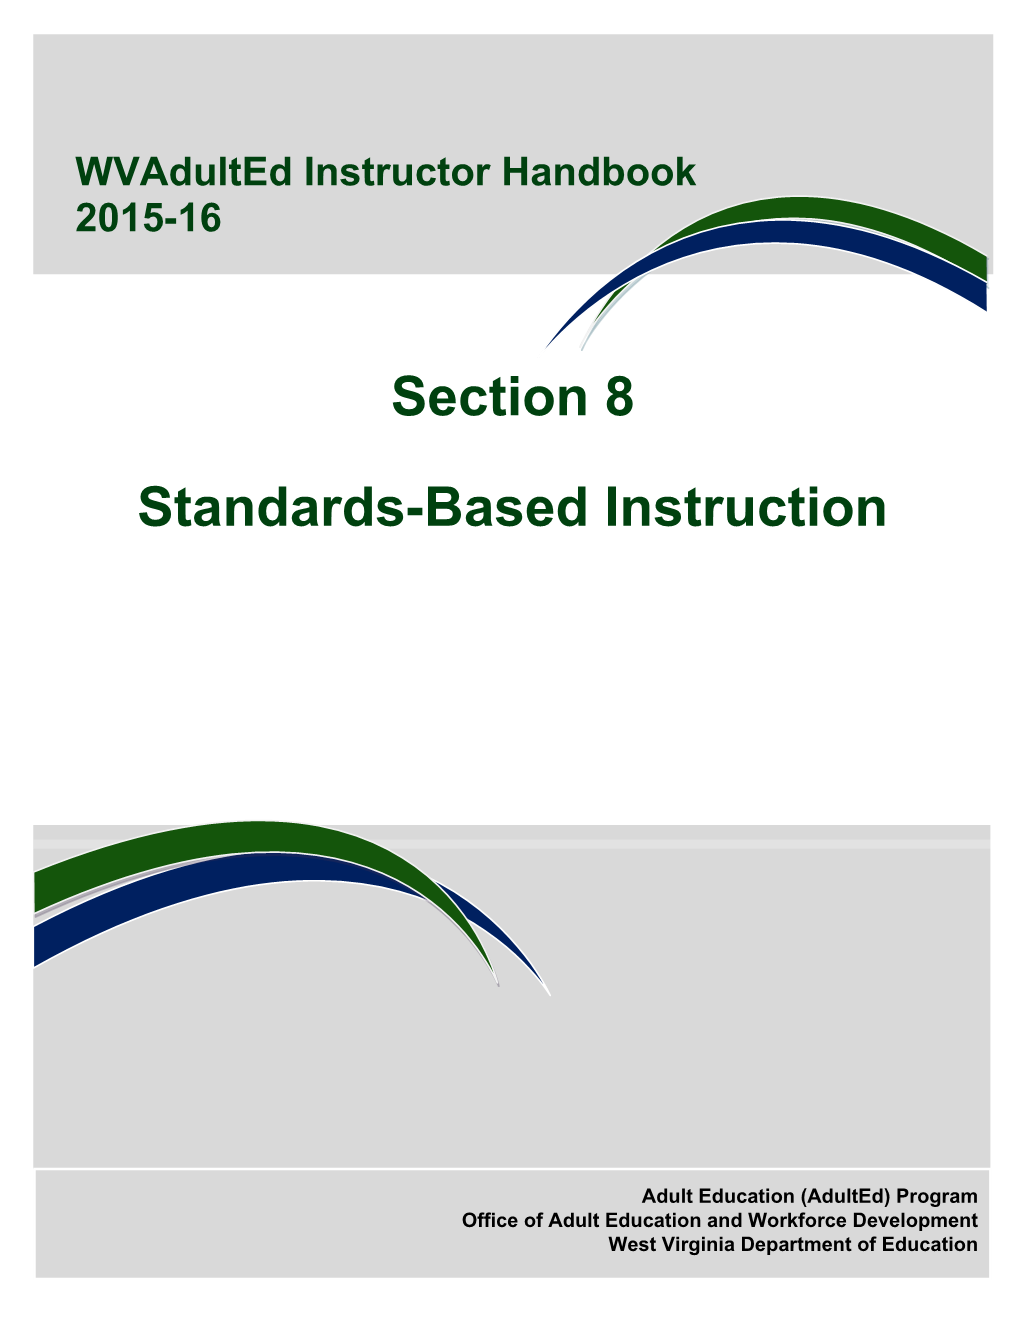 Wvadulted Is Administered Through the West Virginia Department of Education Office of Adult